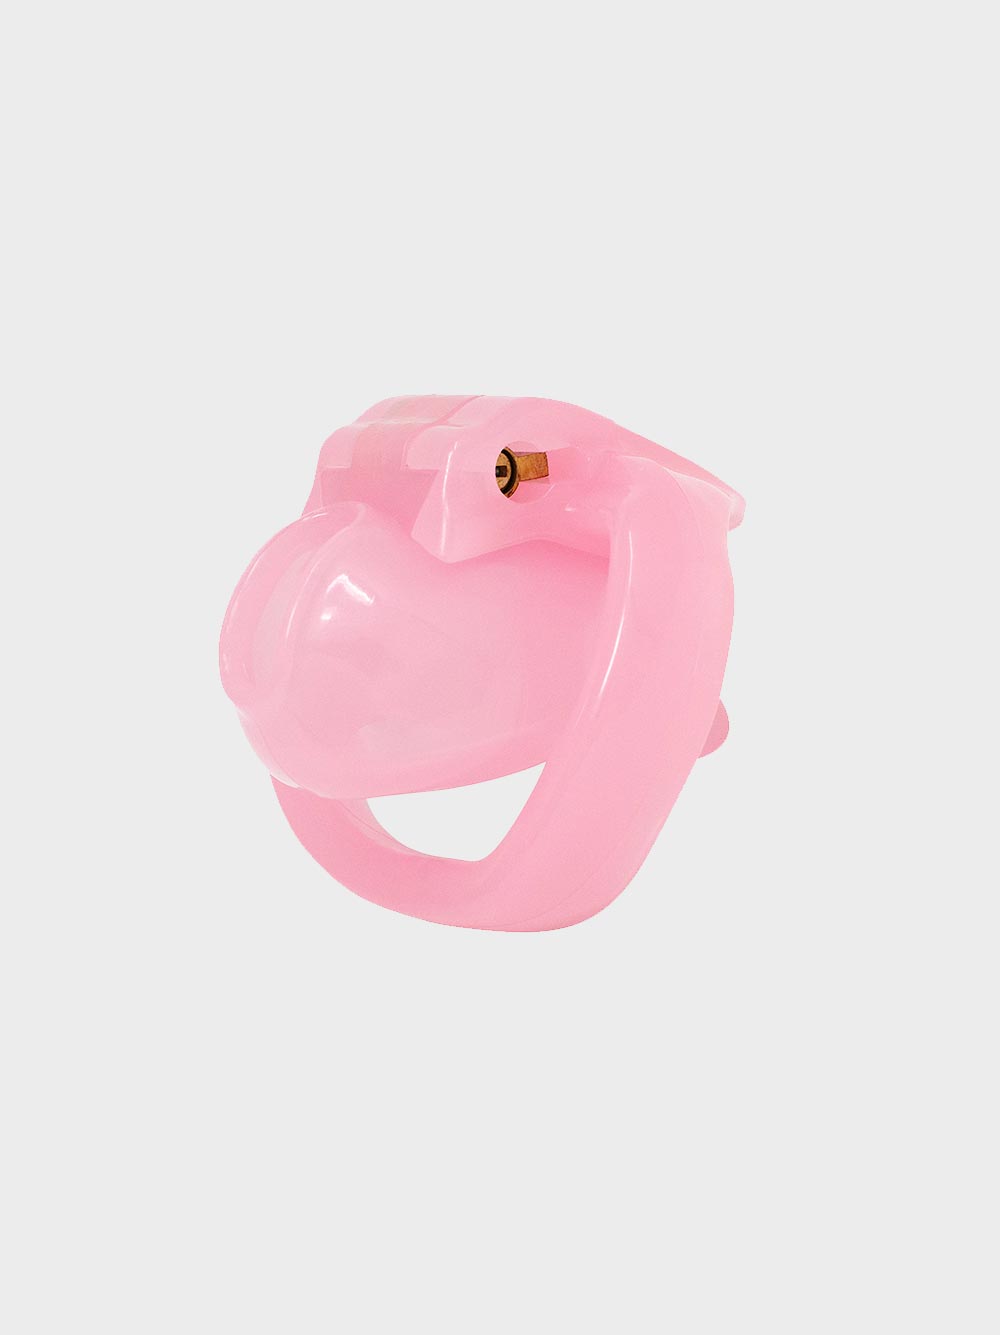 The new V4 nub chastity cage in pink.